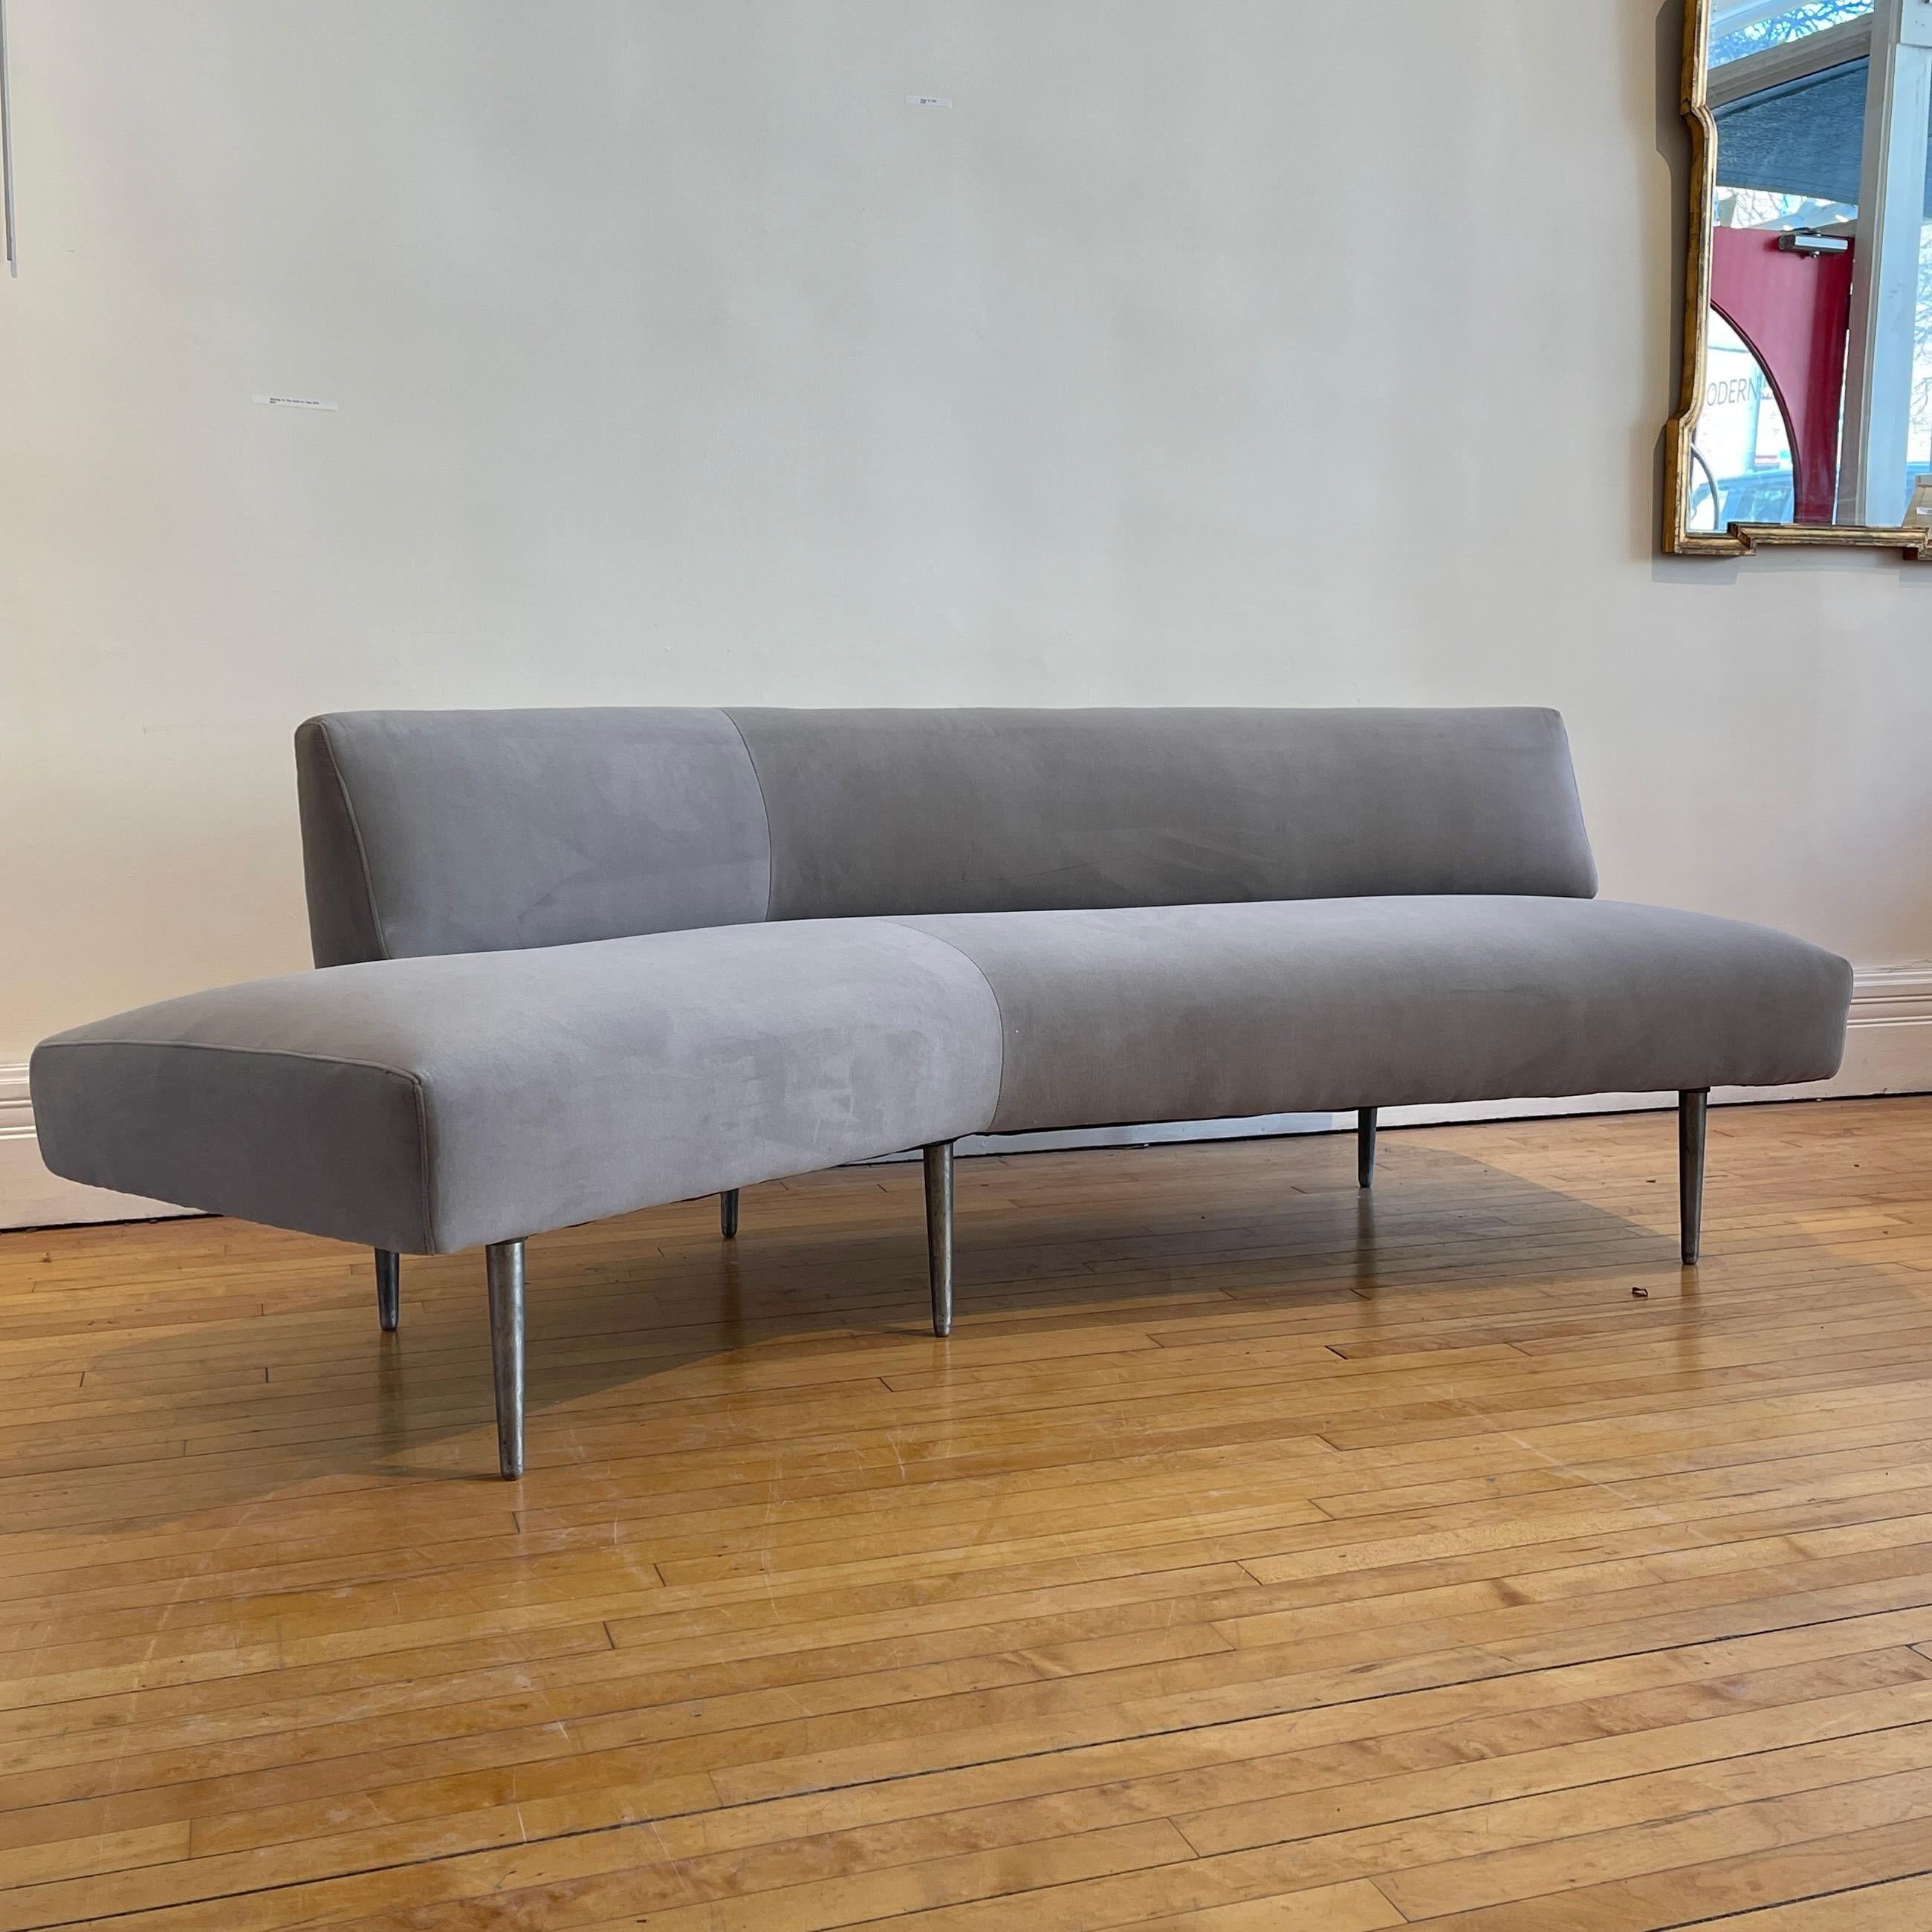 Model 4756 designed by Edward Wormley for Dunbar. Striking angular curved sofa. This piece is amongst Wormley's most collectable pieces. Freshly reupholsted in a stunning high grade grey velvet. Absolutely stunning.

 